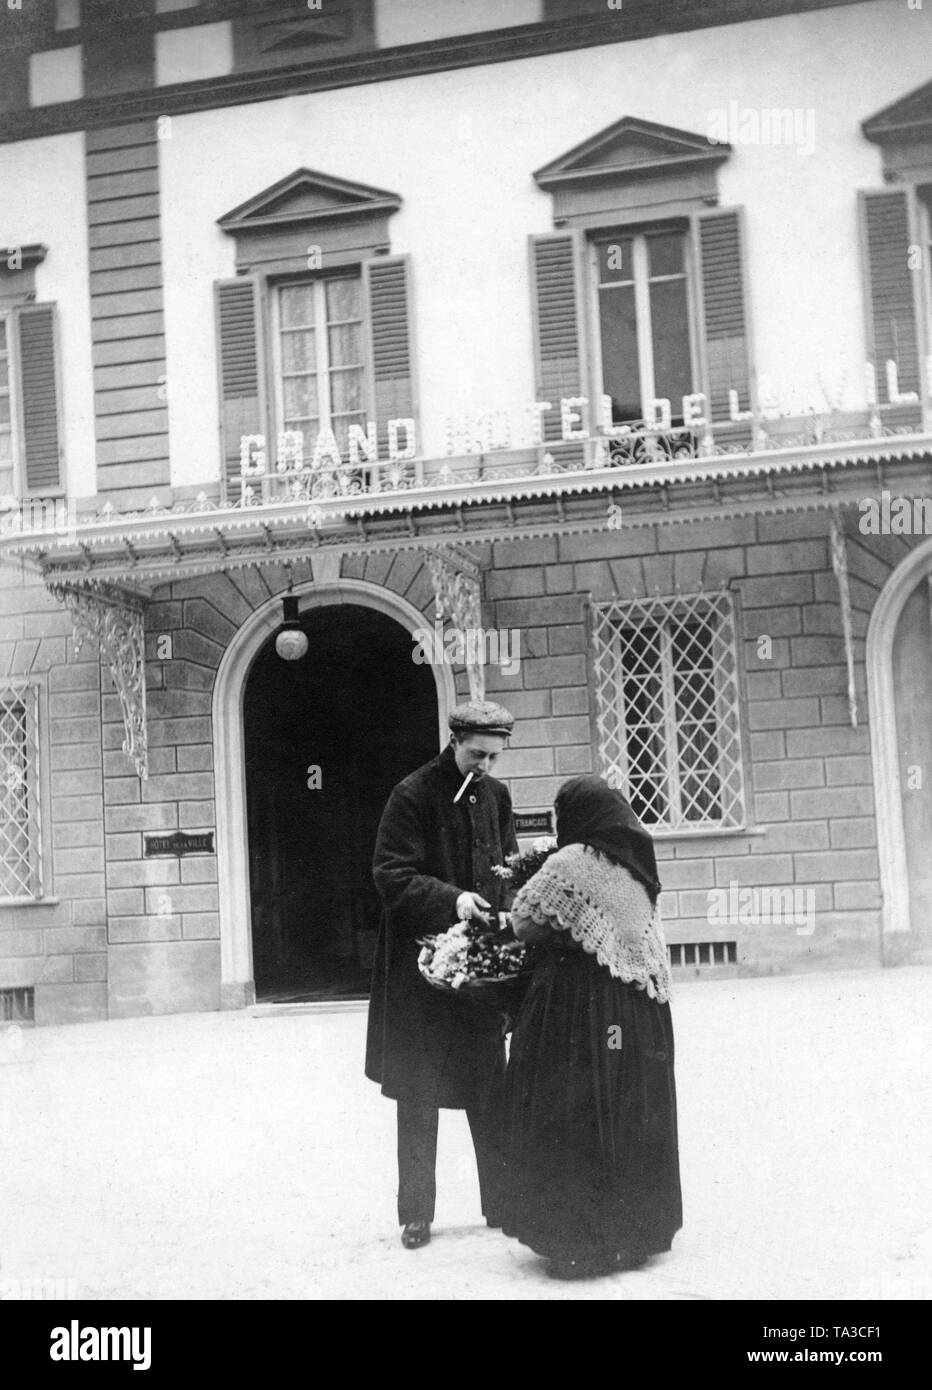 Crown Prince Wilhelm of Prussia buys a bunch of flowers from a street vendor in front of the Grand Hotel Villa Medici. Stock Photo